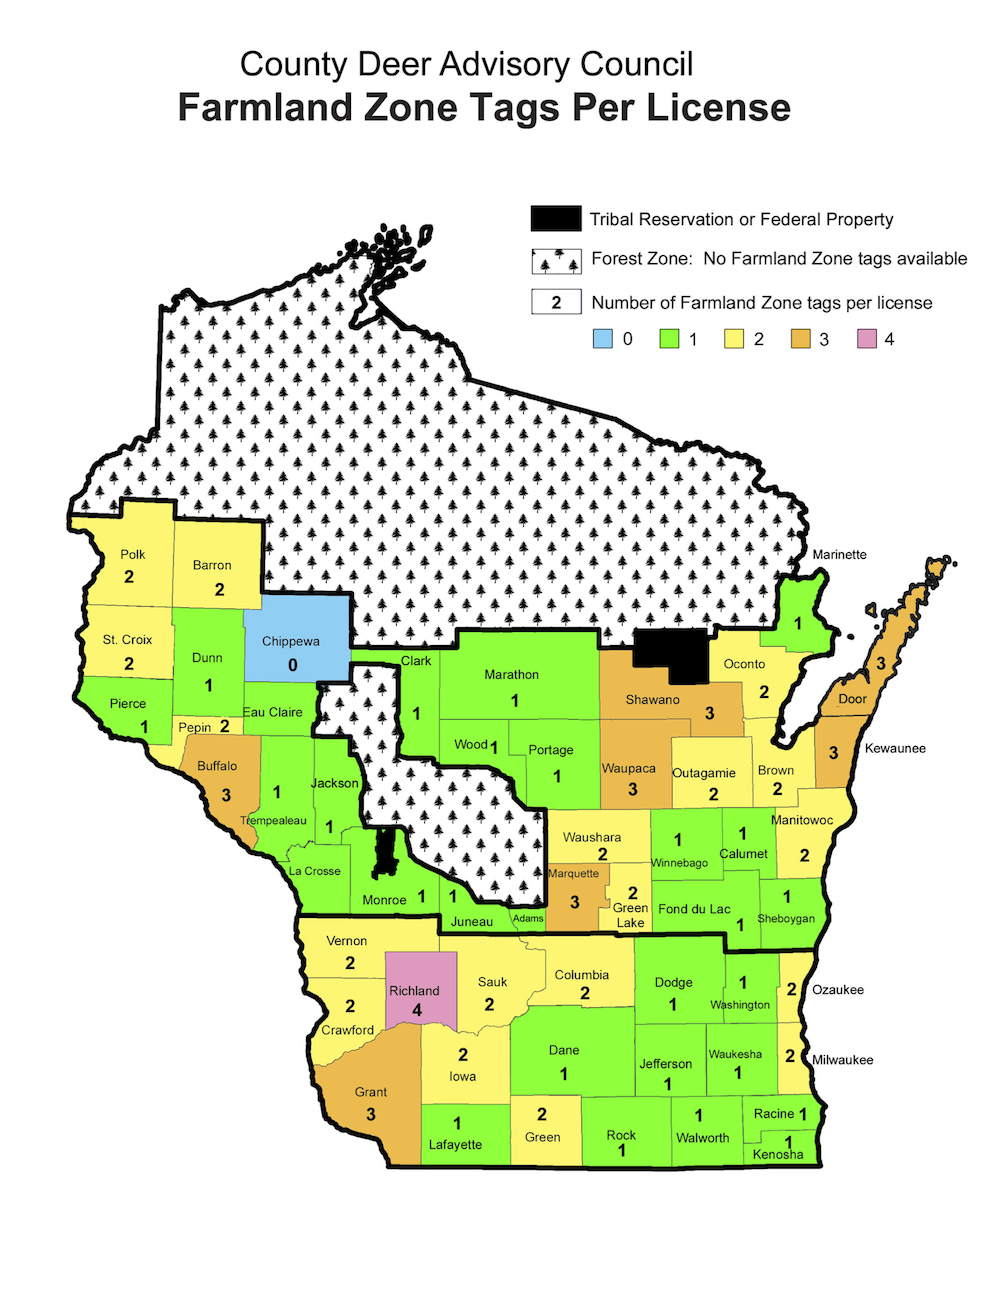 Drydenwire CountybyCounty Proposals For Fall Deer Seasons